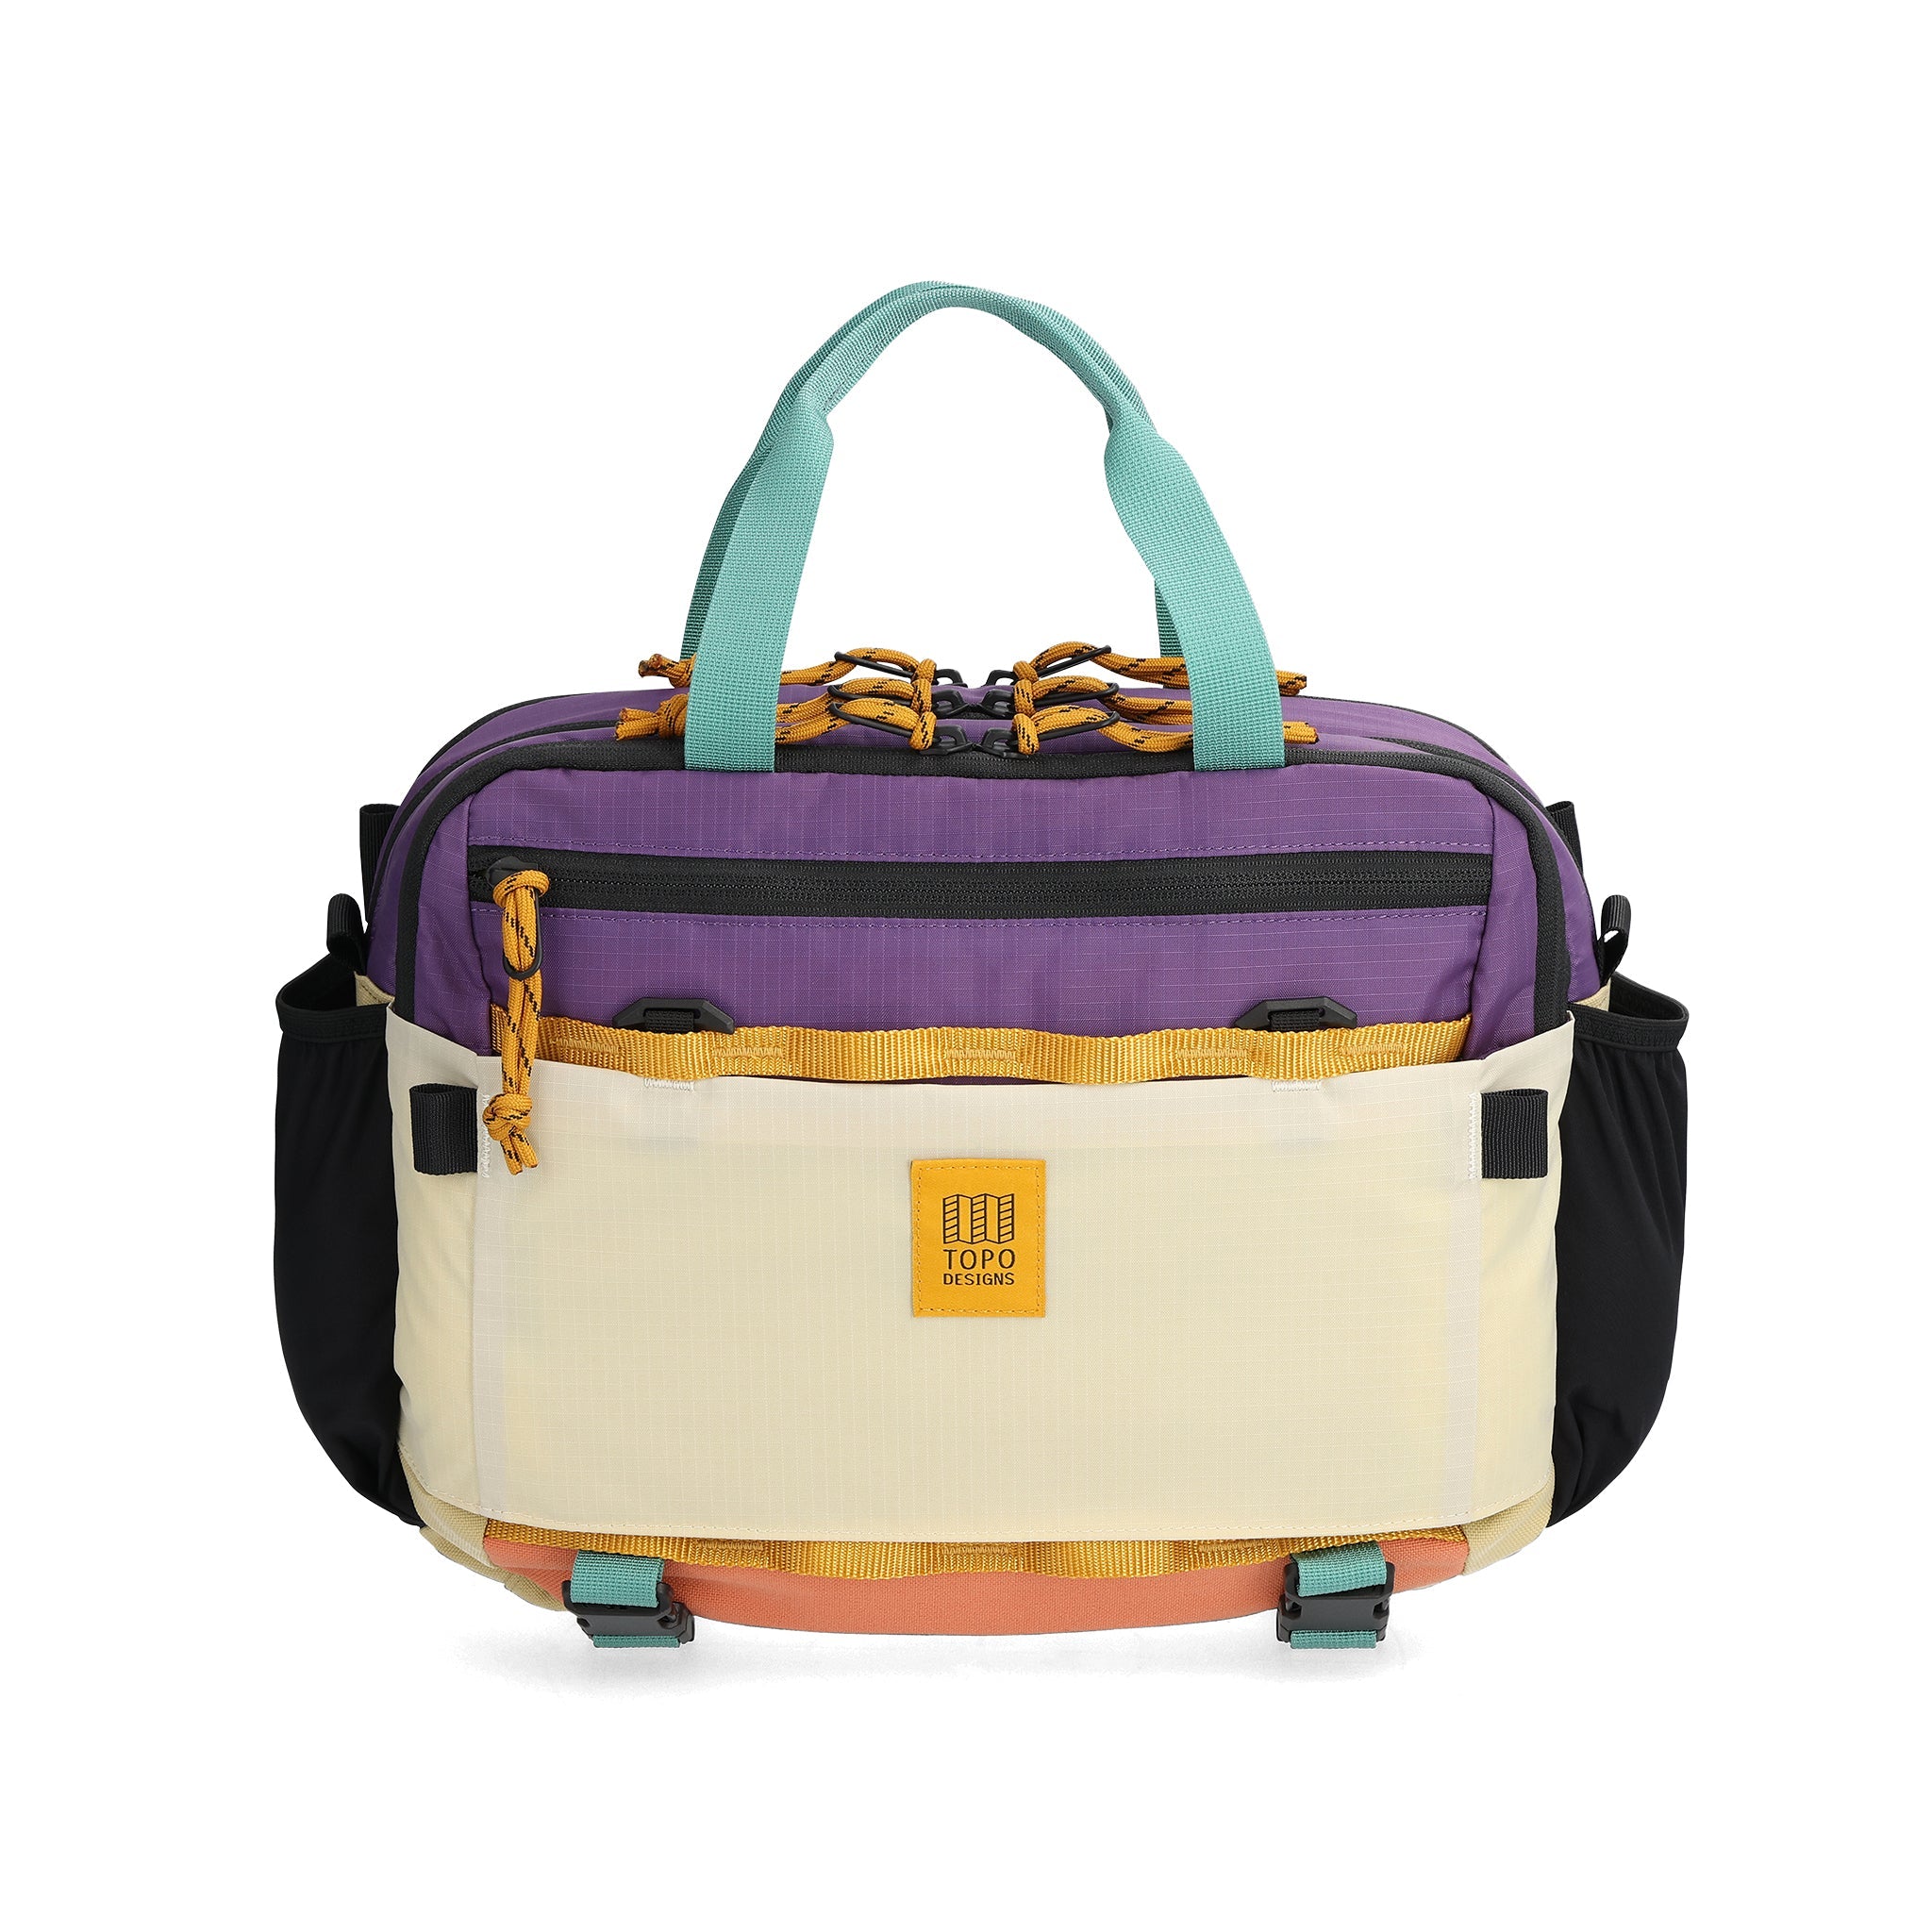 Front View of Topo Designs Mountain Cross Bag in "Loganberry / Bone White"